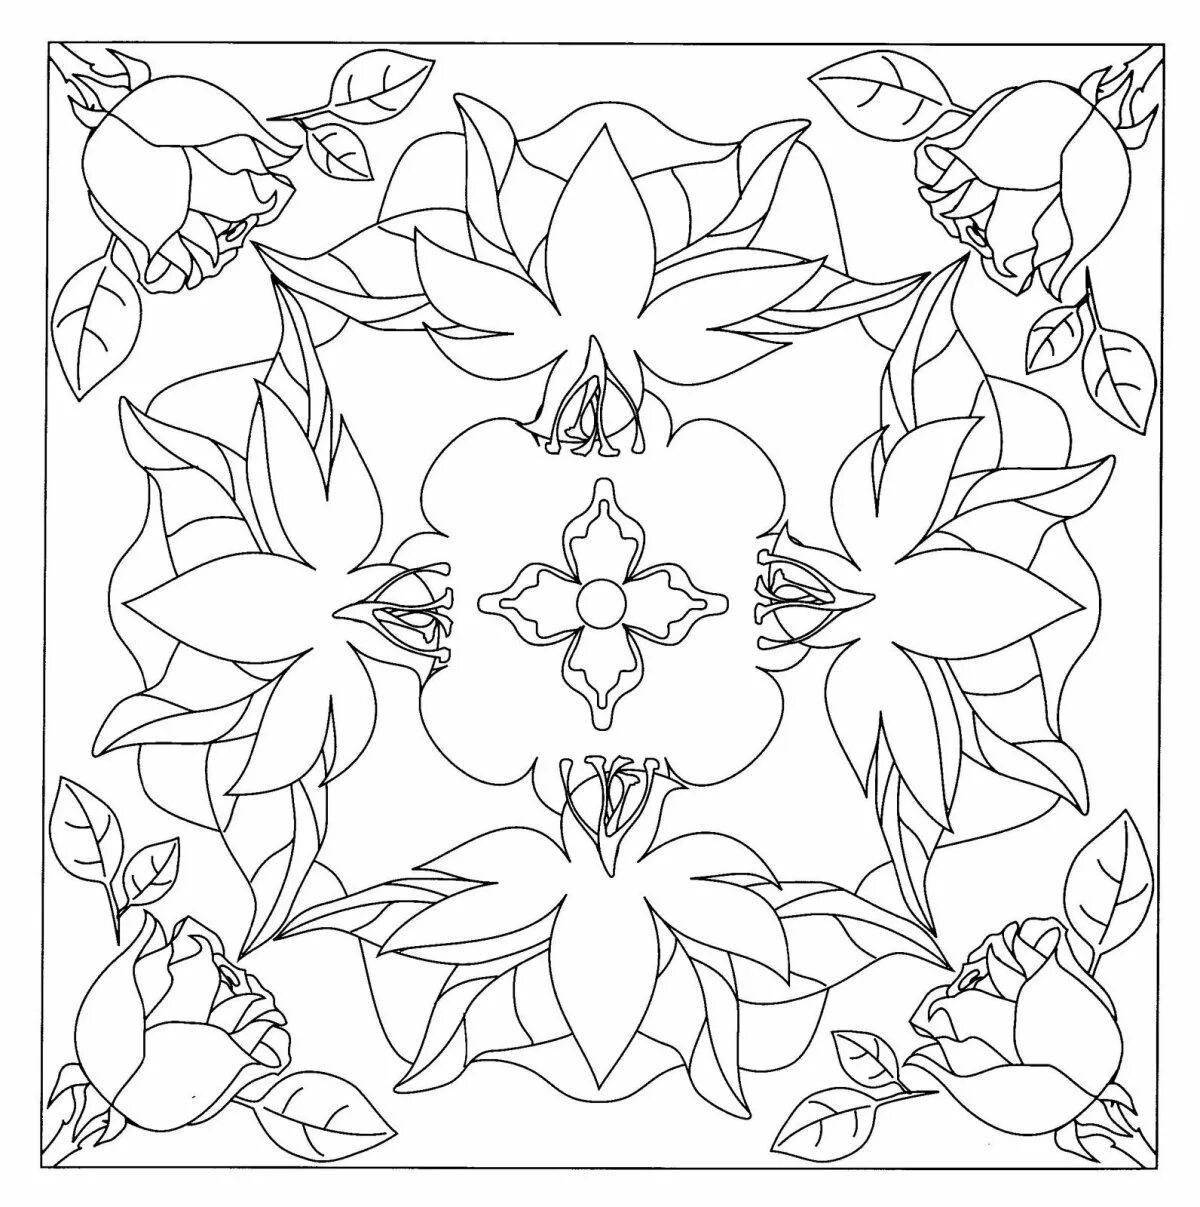 Bold pavlovian scarf coloring book for kids